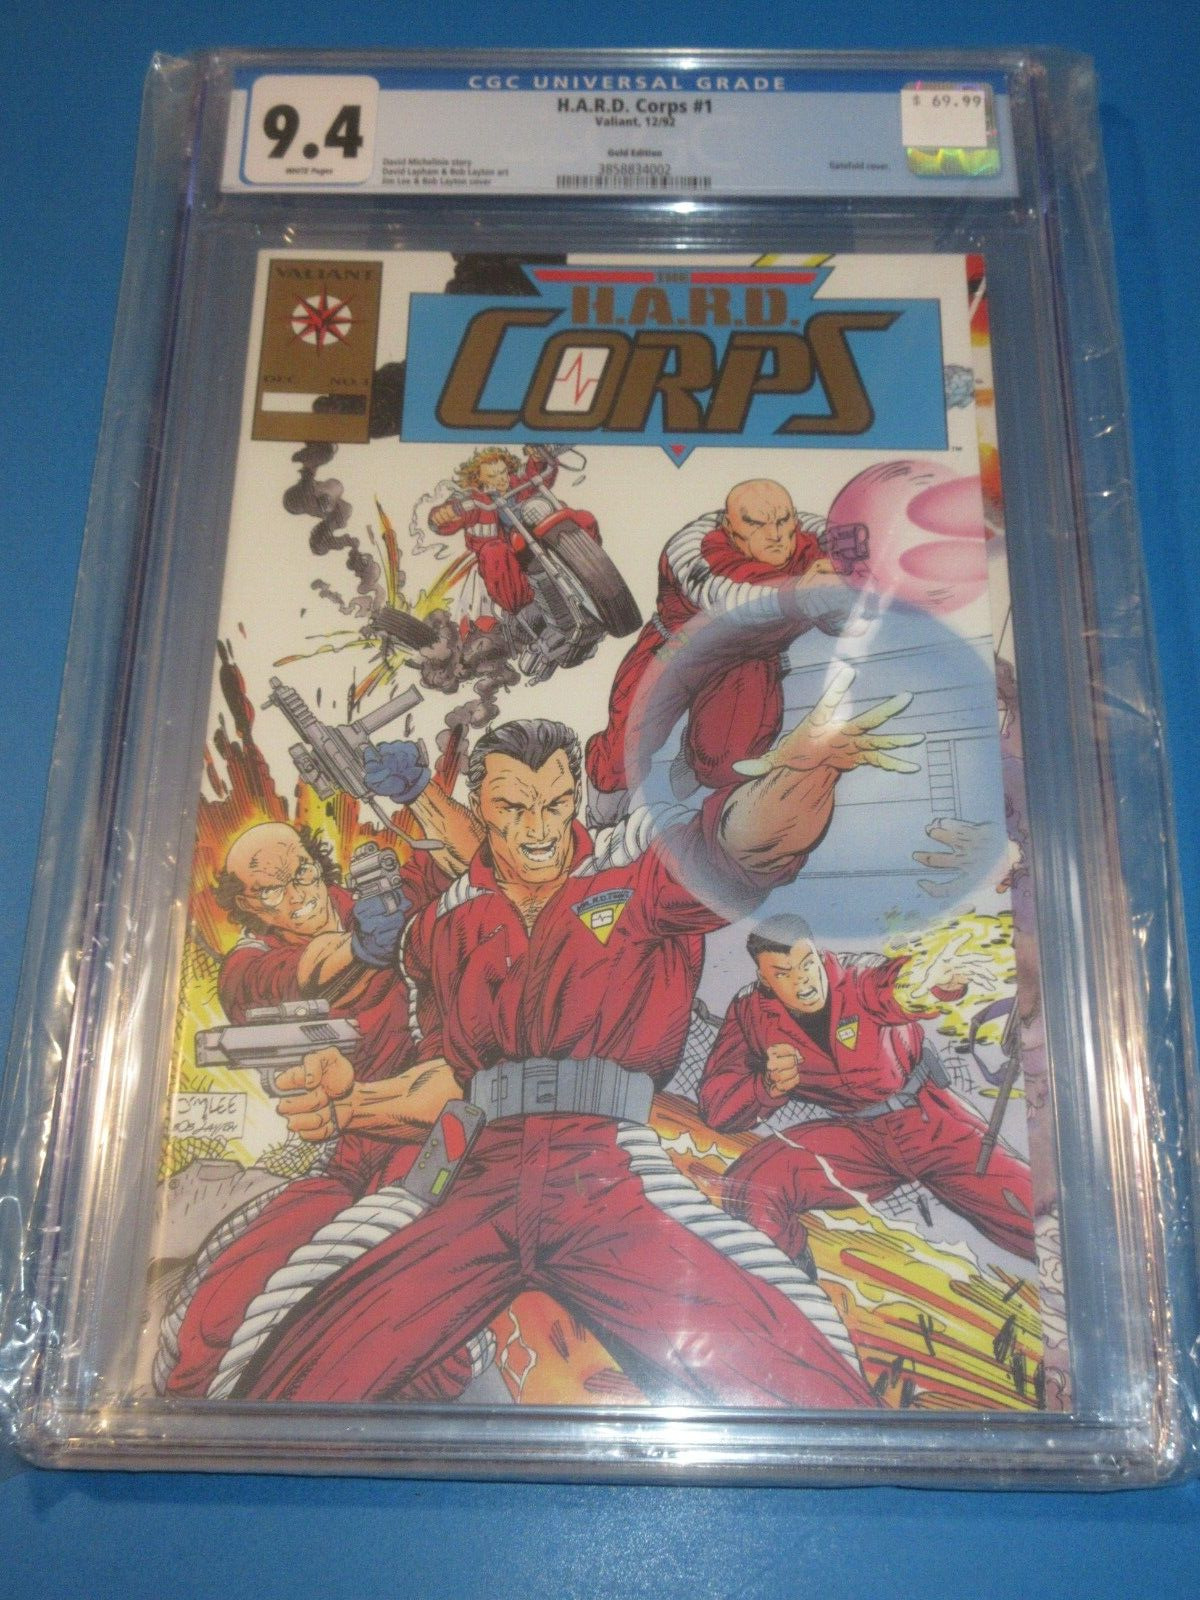 HARD Corps #1 Gold Variant CGC 9.4 NM Gorgeous Gem wow